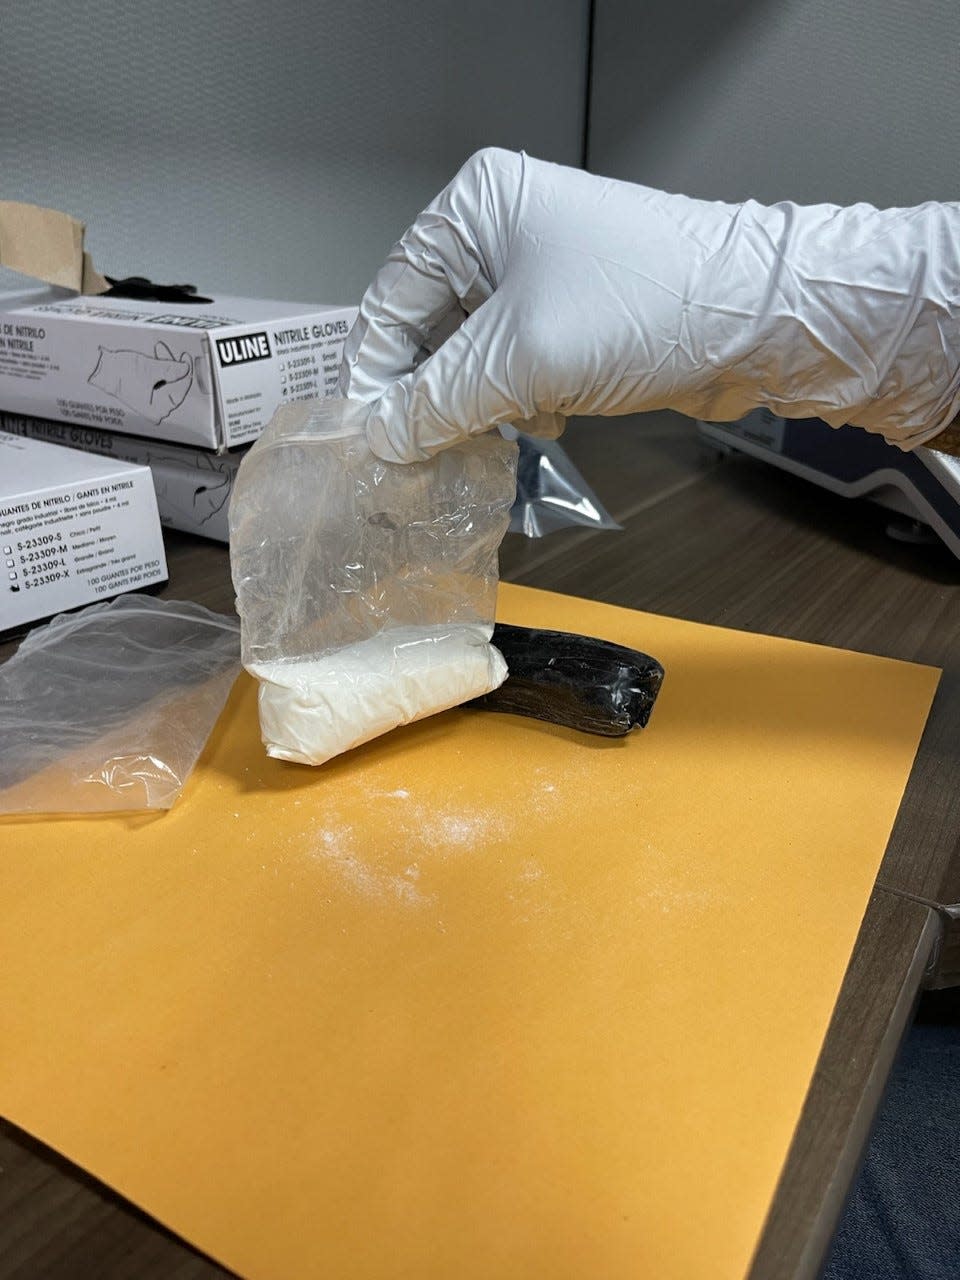 Bay County Sheriff's Office investigators seized this package and many others like it after it field-tested positive for fentanyl in a recent drug bust.